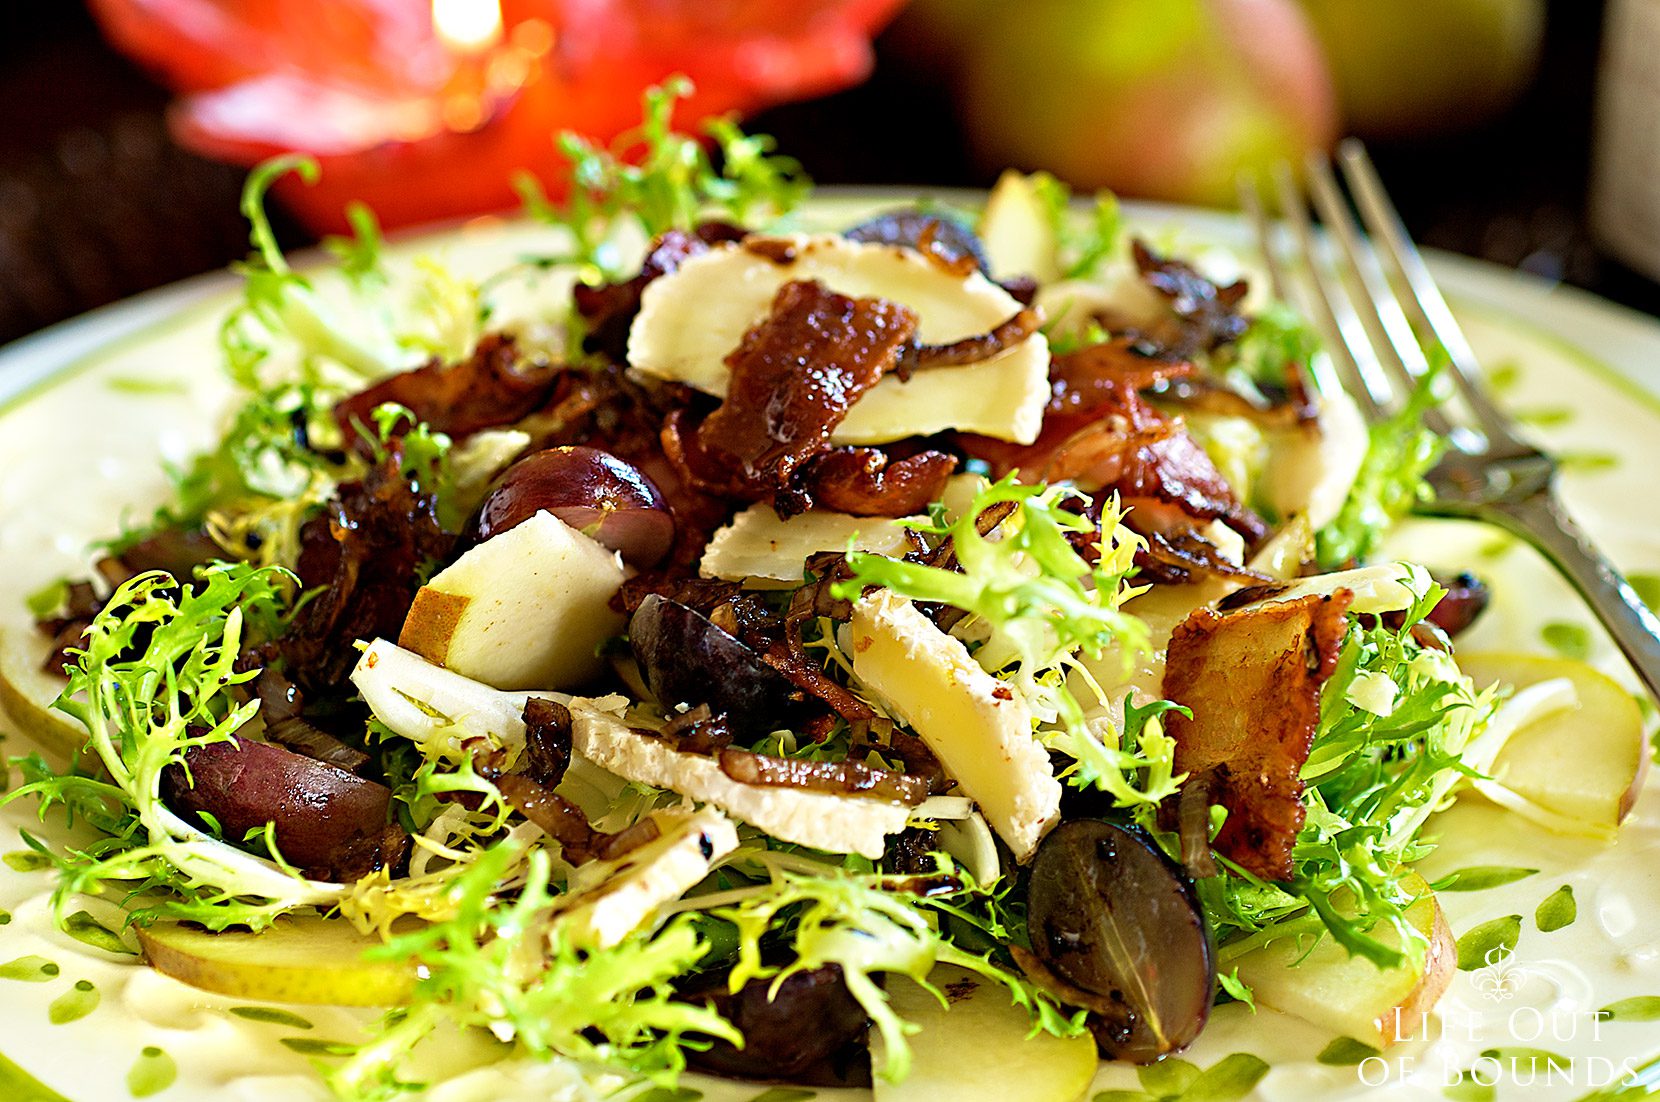 Recipe-for-autumn-salad-with-aged-goat-cheese-pears-bacon-and-balsamic-shallot-vinaigrette